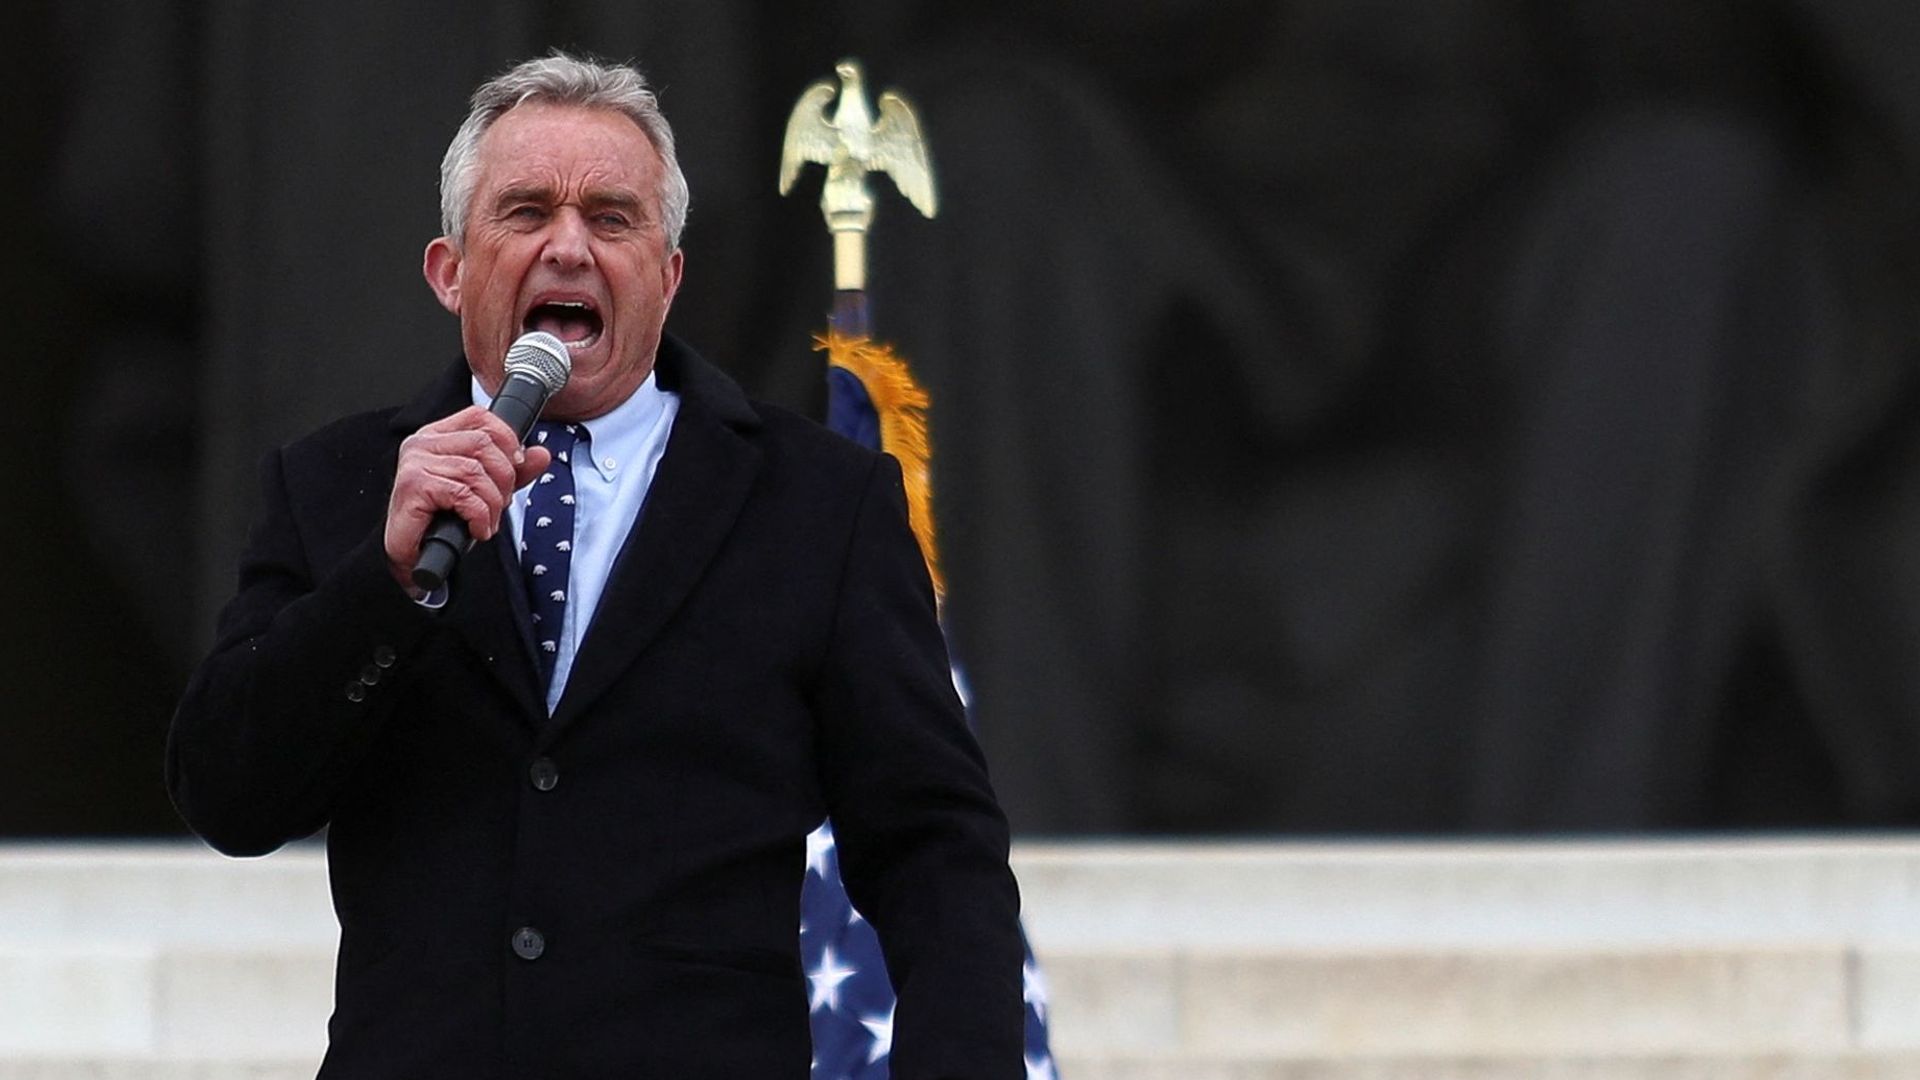 Robert F. Kennedy Jr. has claimed 100 studies prove vaccines cause autism, which is one of many reasons he shouldn't be president.